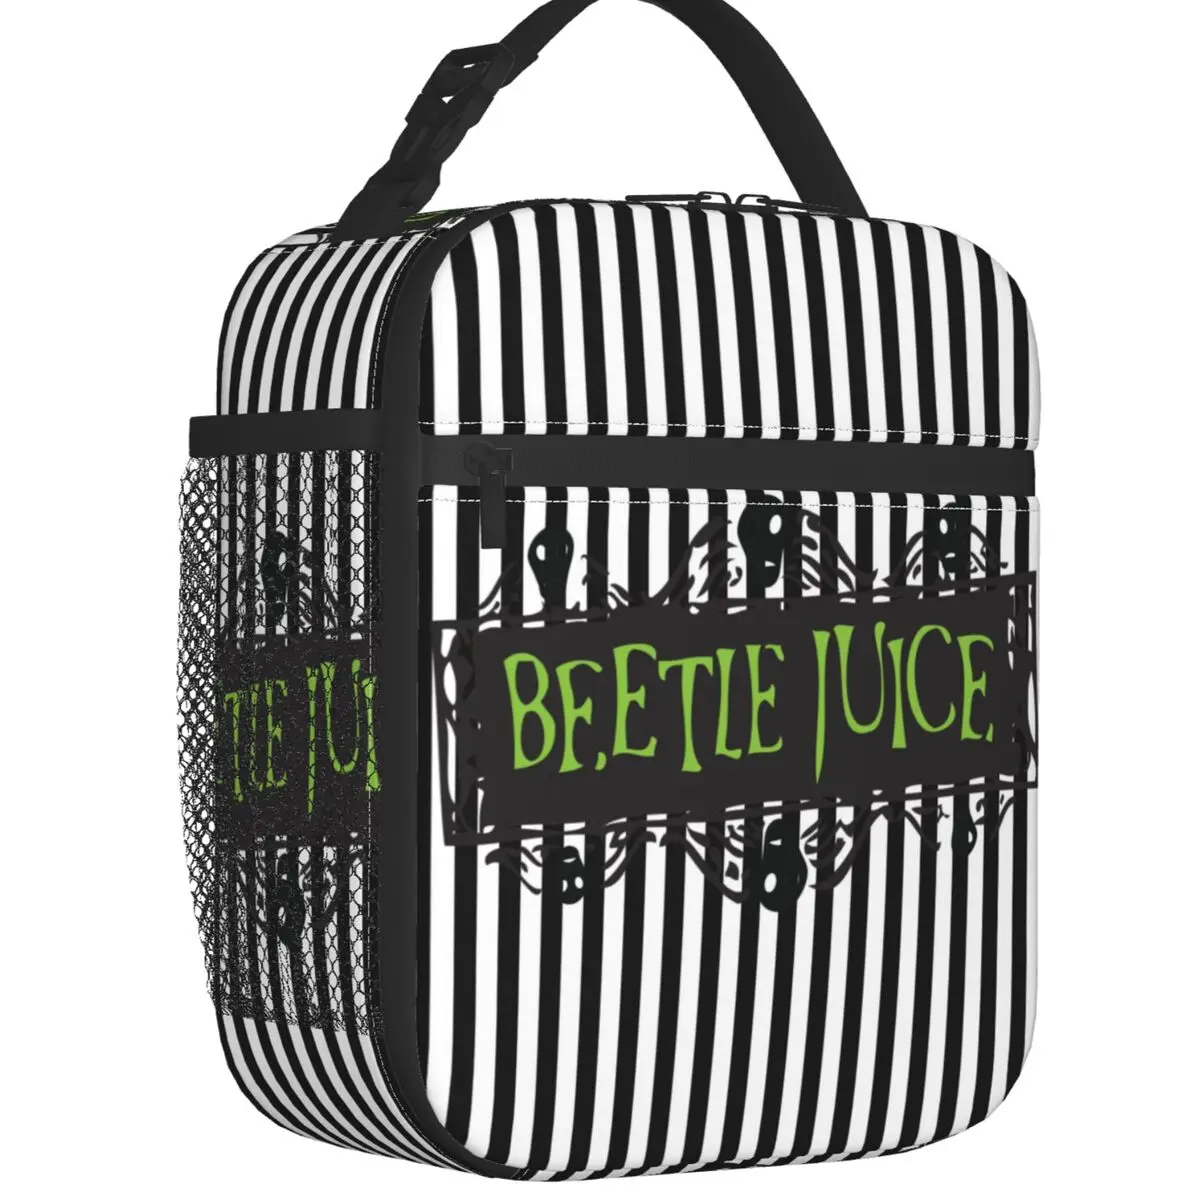 Tim Burton Horror Movie Beetlejuice Insulated Lunch Bags for Women Portable Cooler Thermal Bento Box Kids School Children